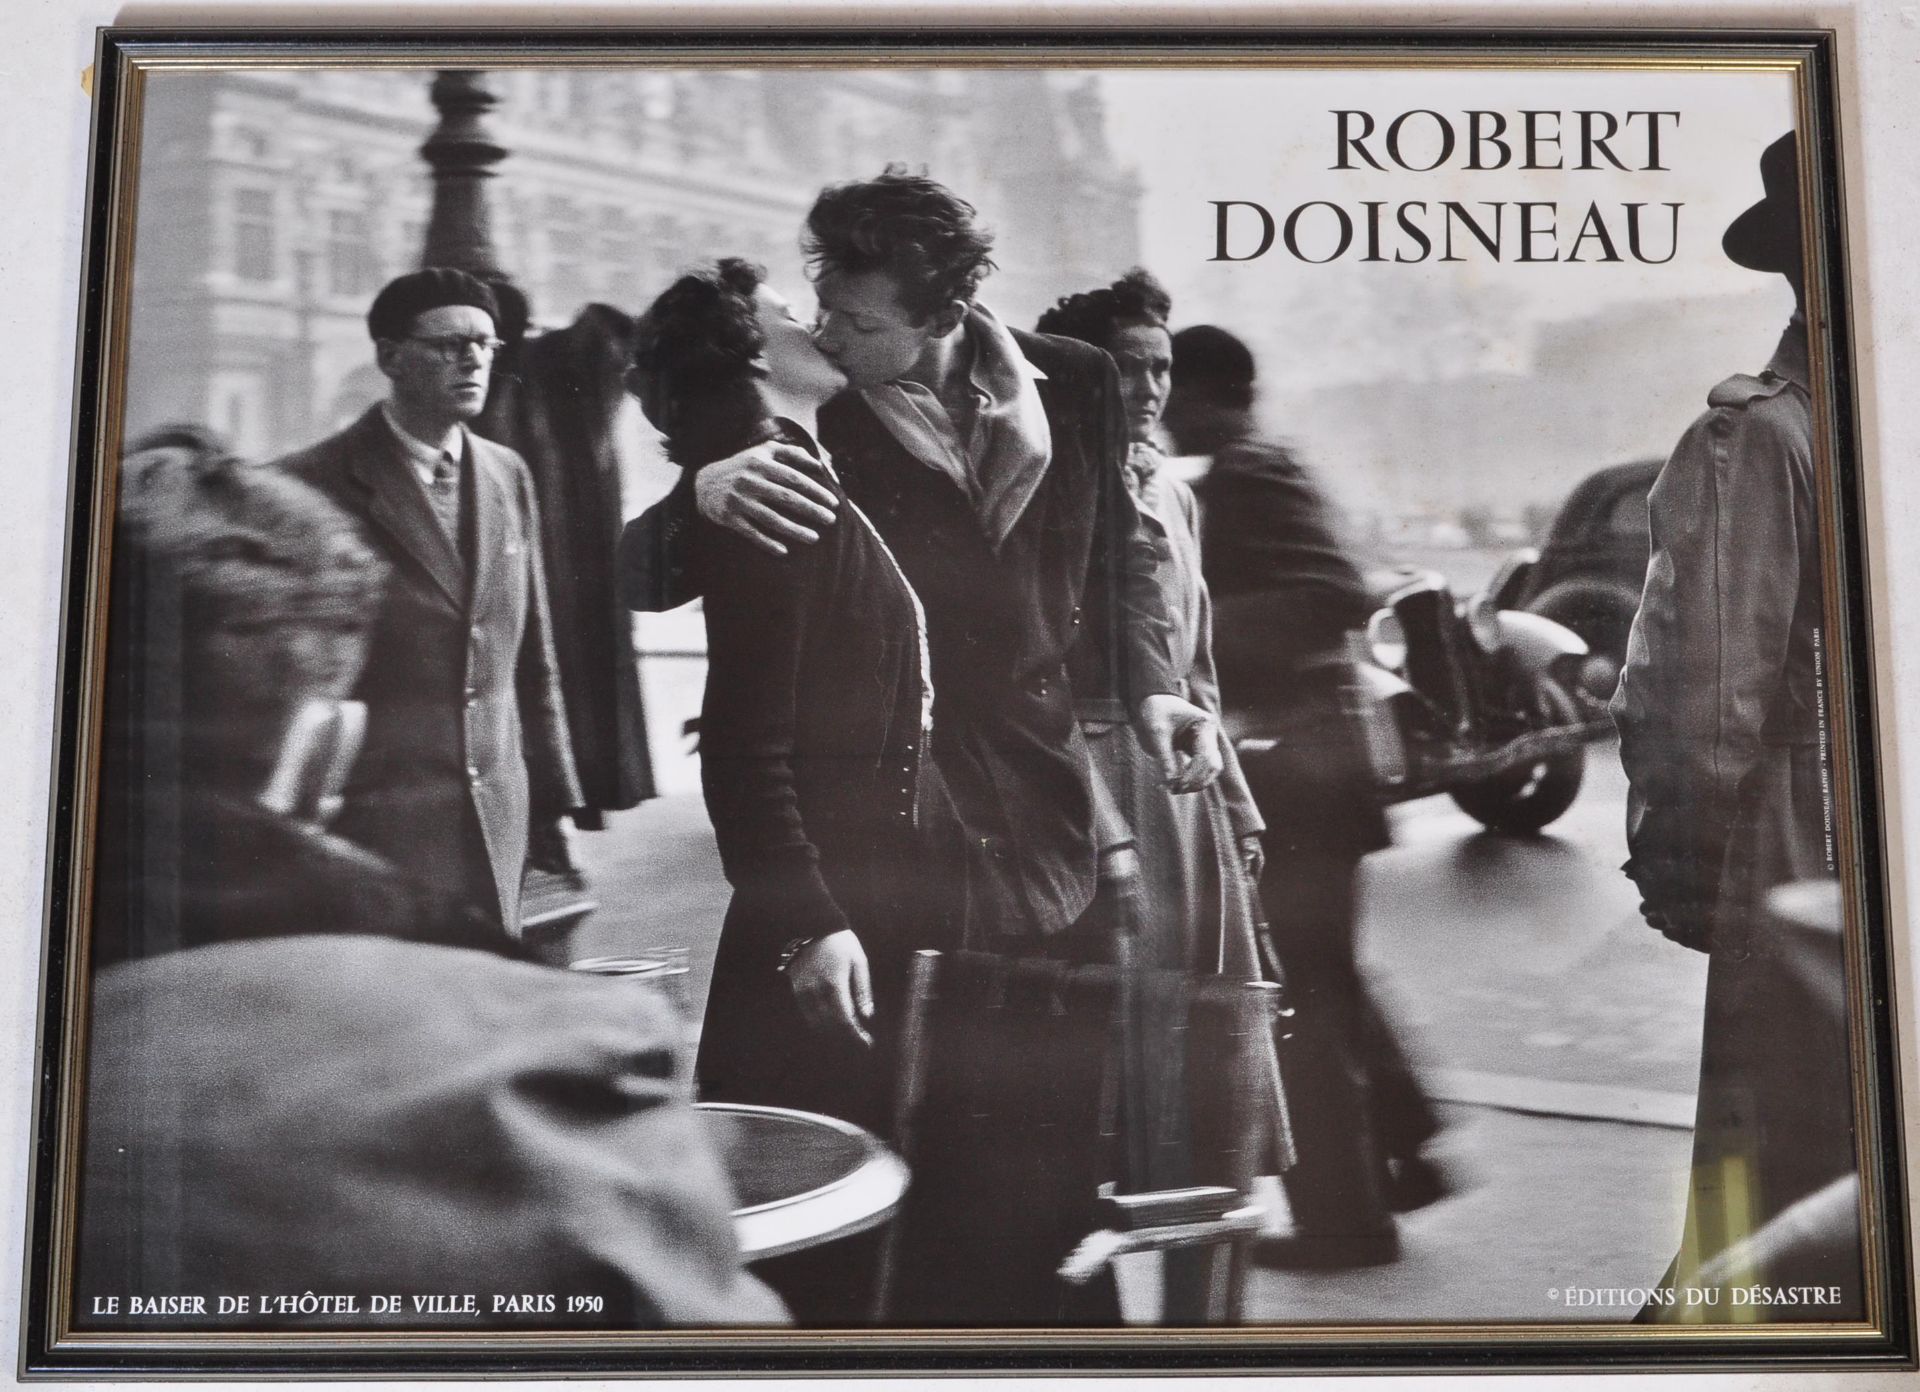 ROBERT DOISNEAU - KISS BY THE TOWN HALL - FRAMED POSTER